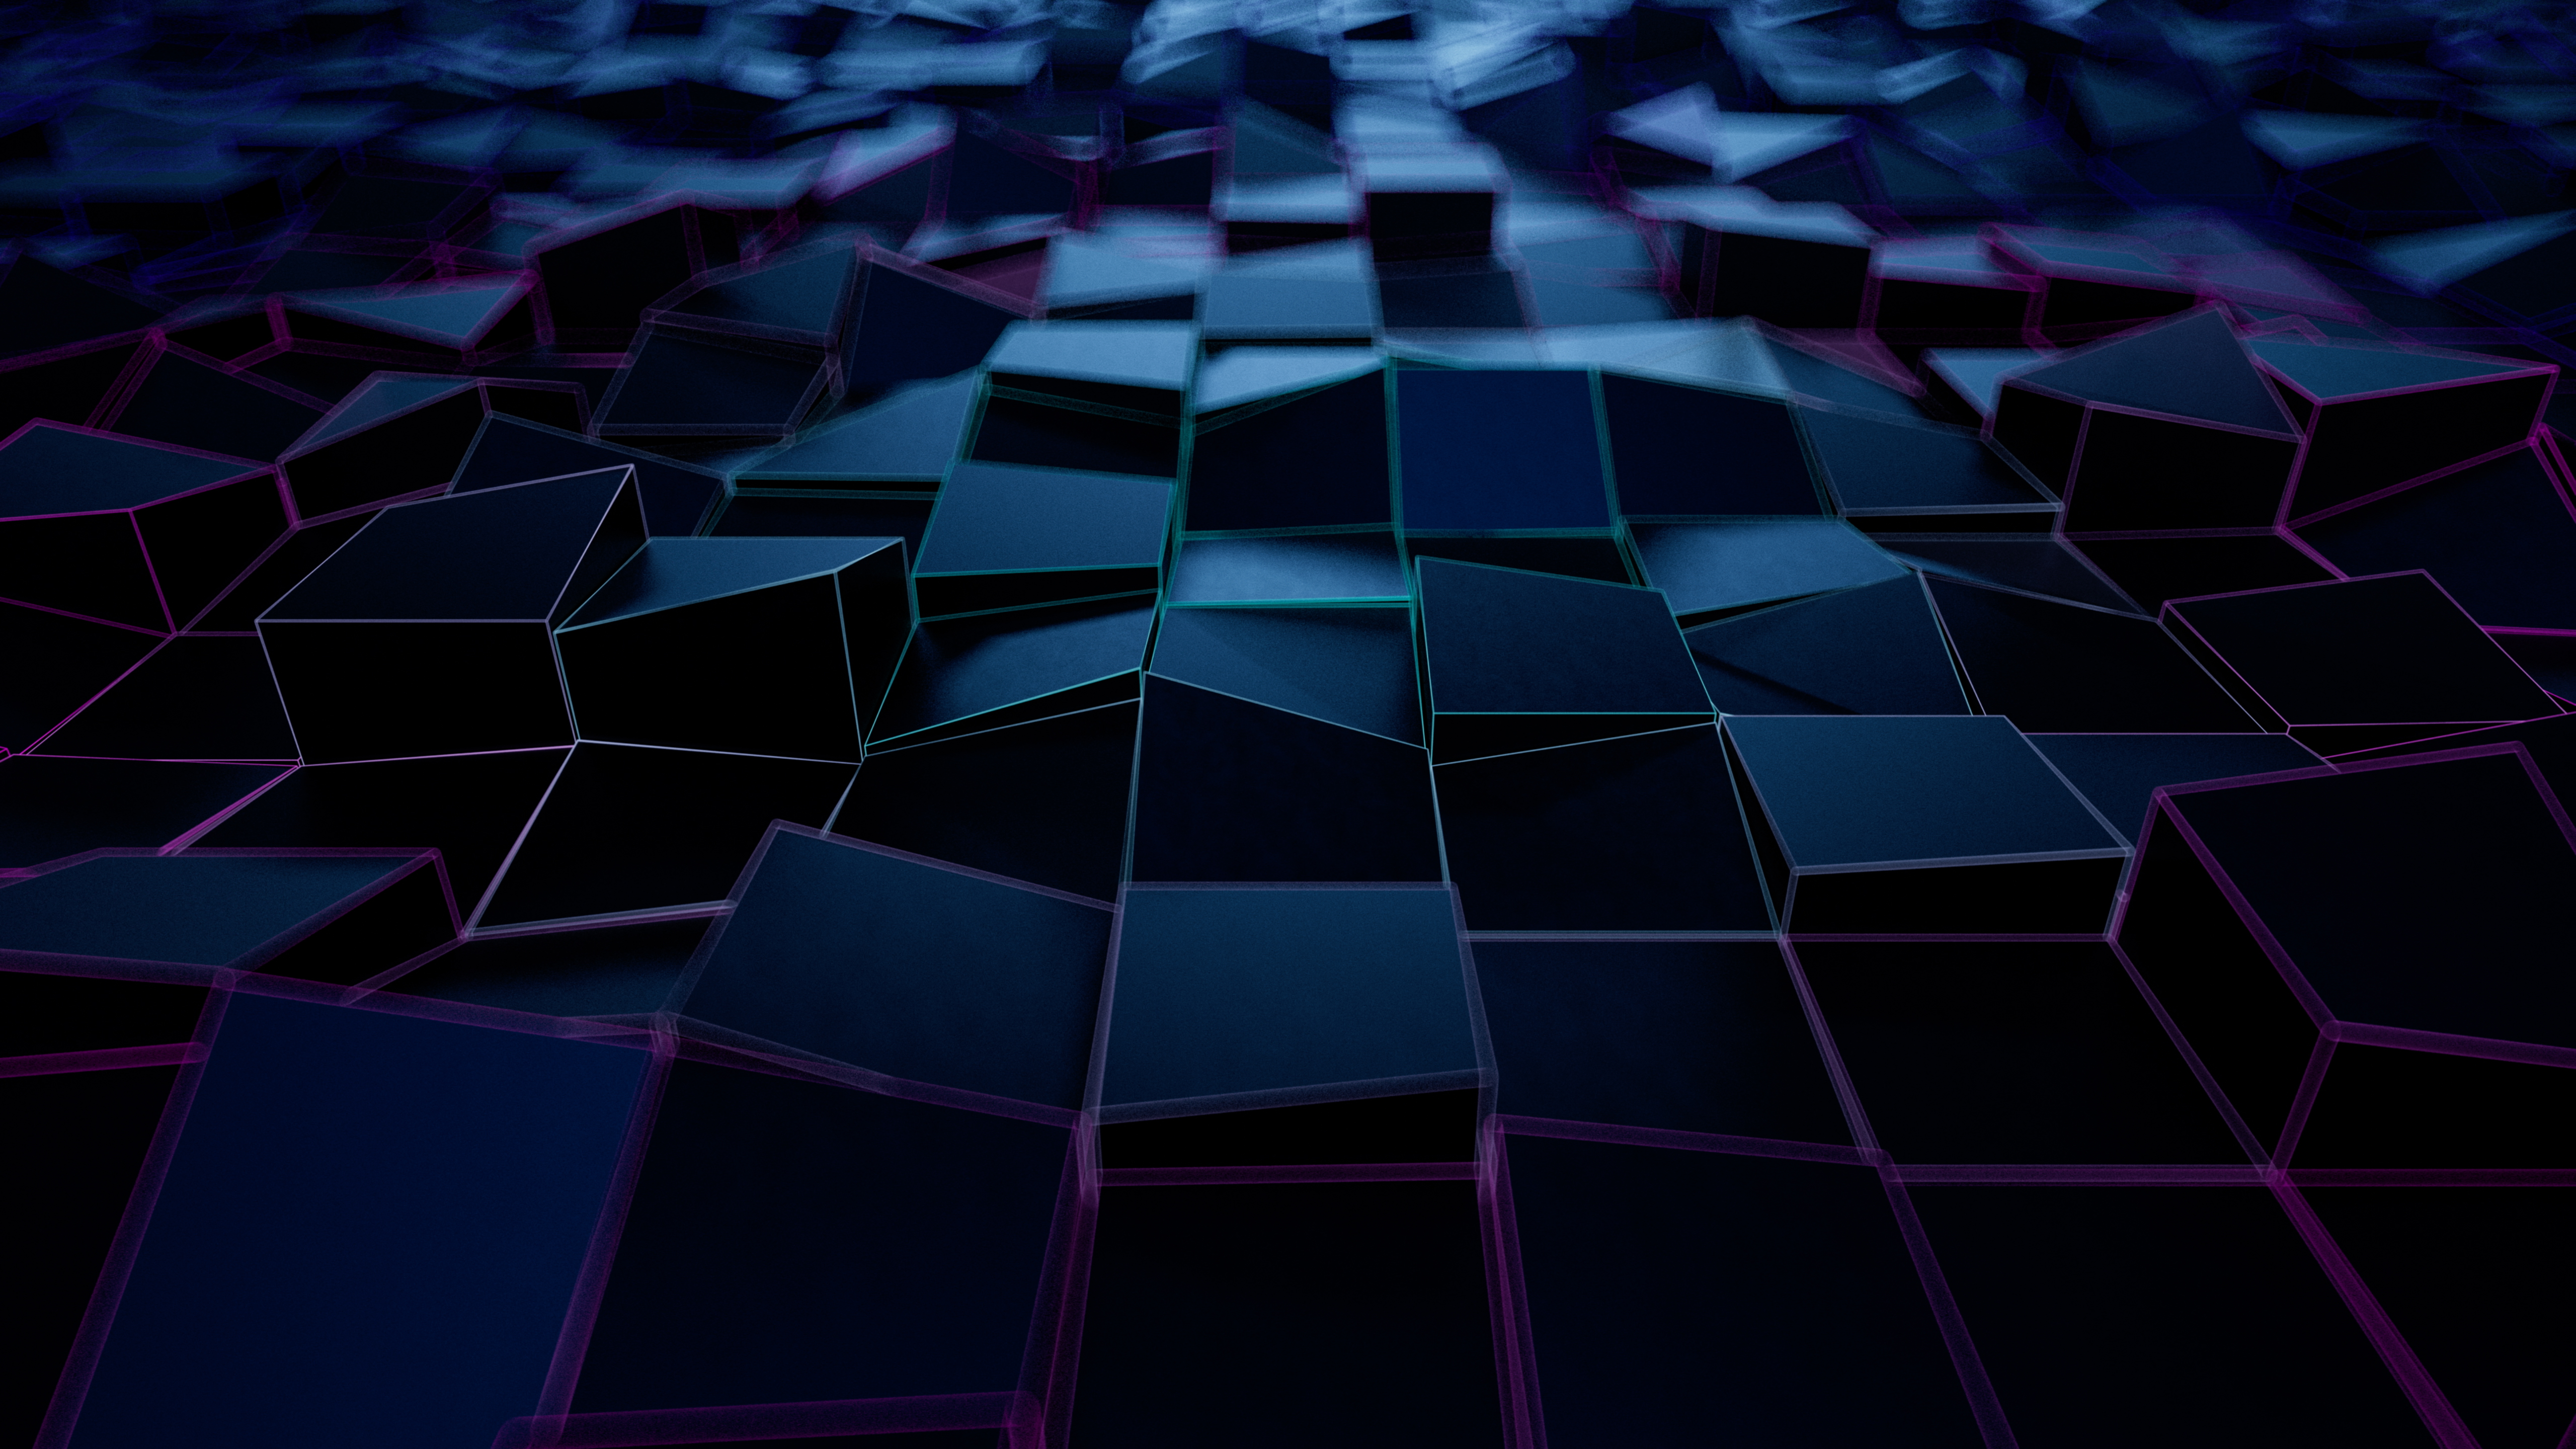 3D cubes Wallpaper 4K, Floating cubes, Abstract, #9263